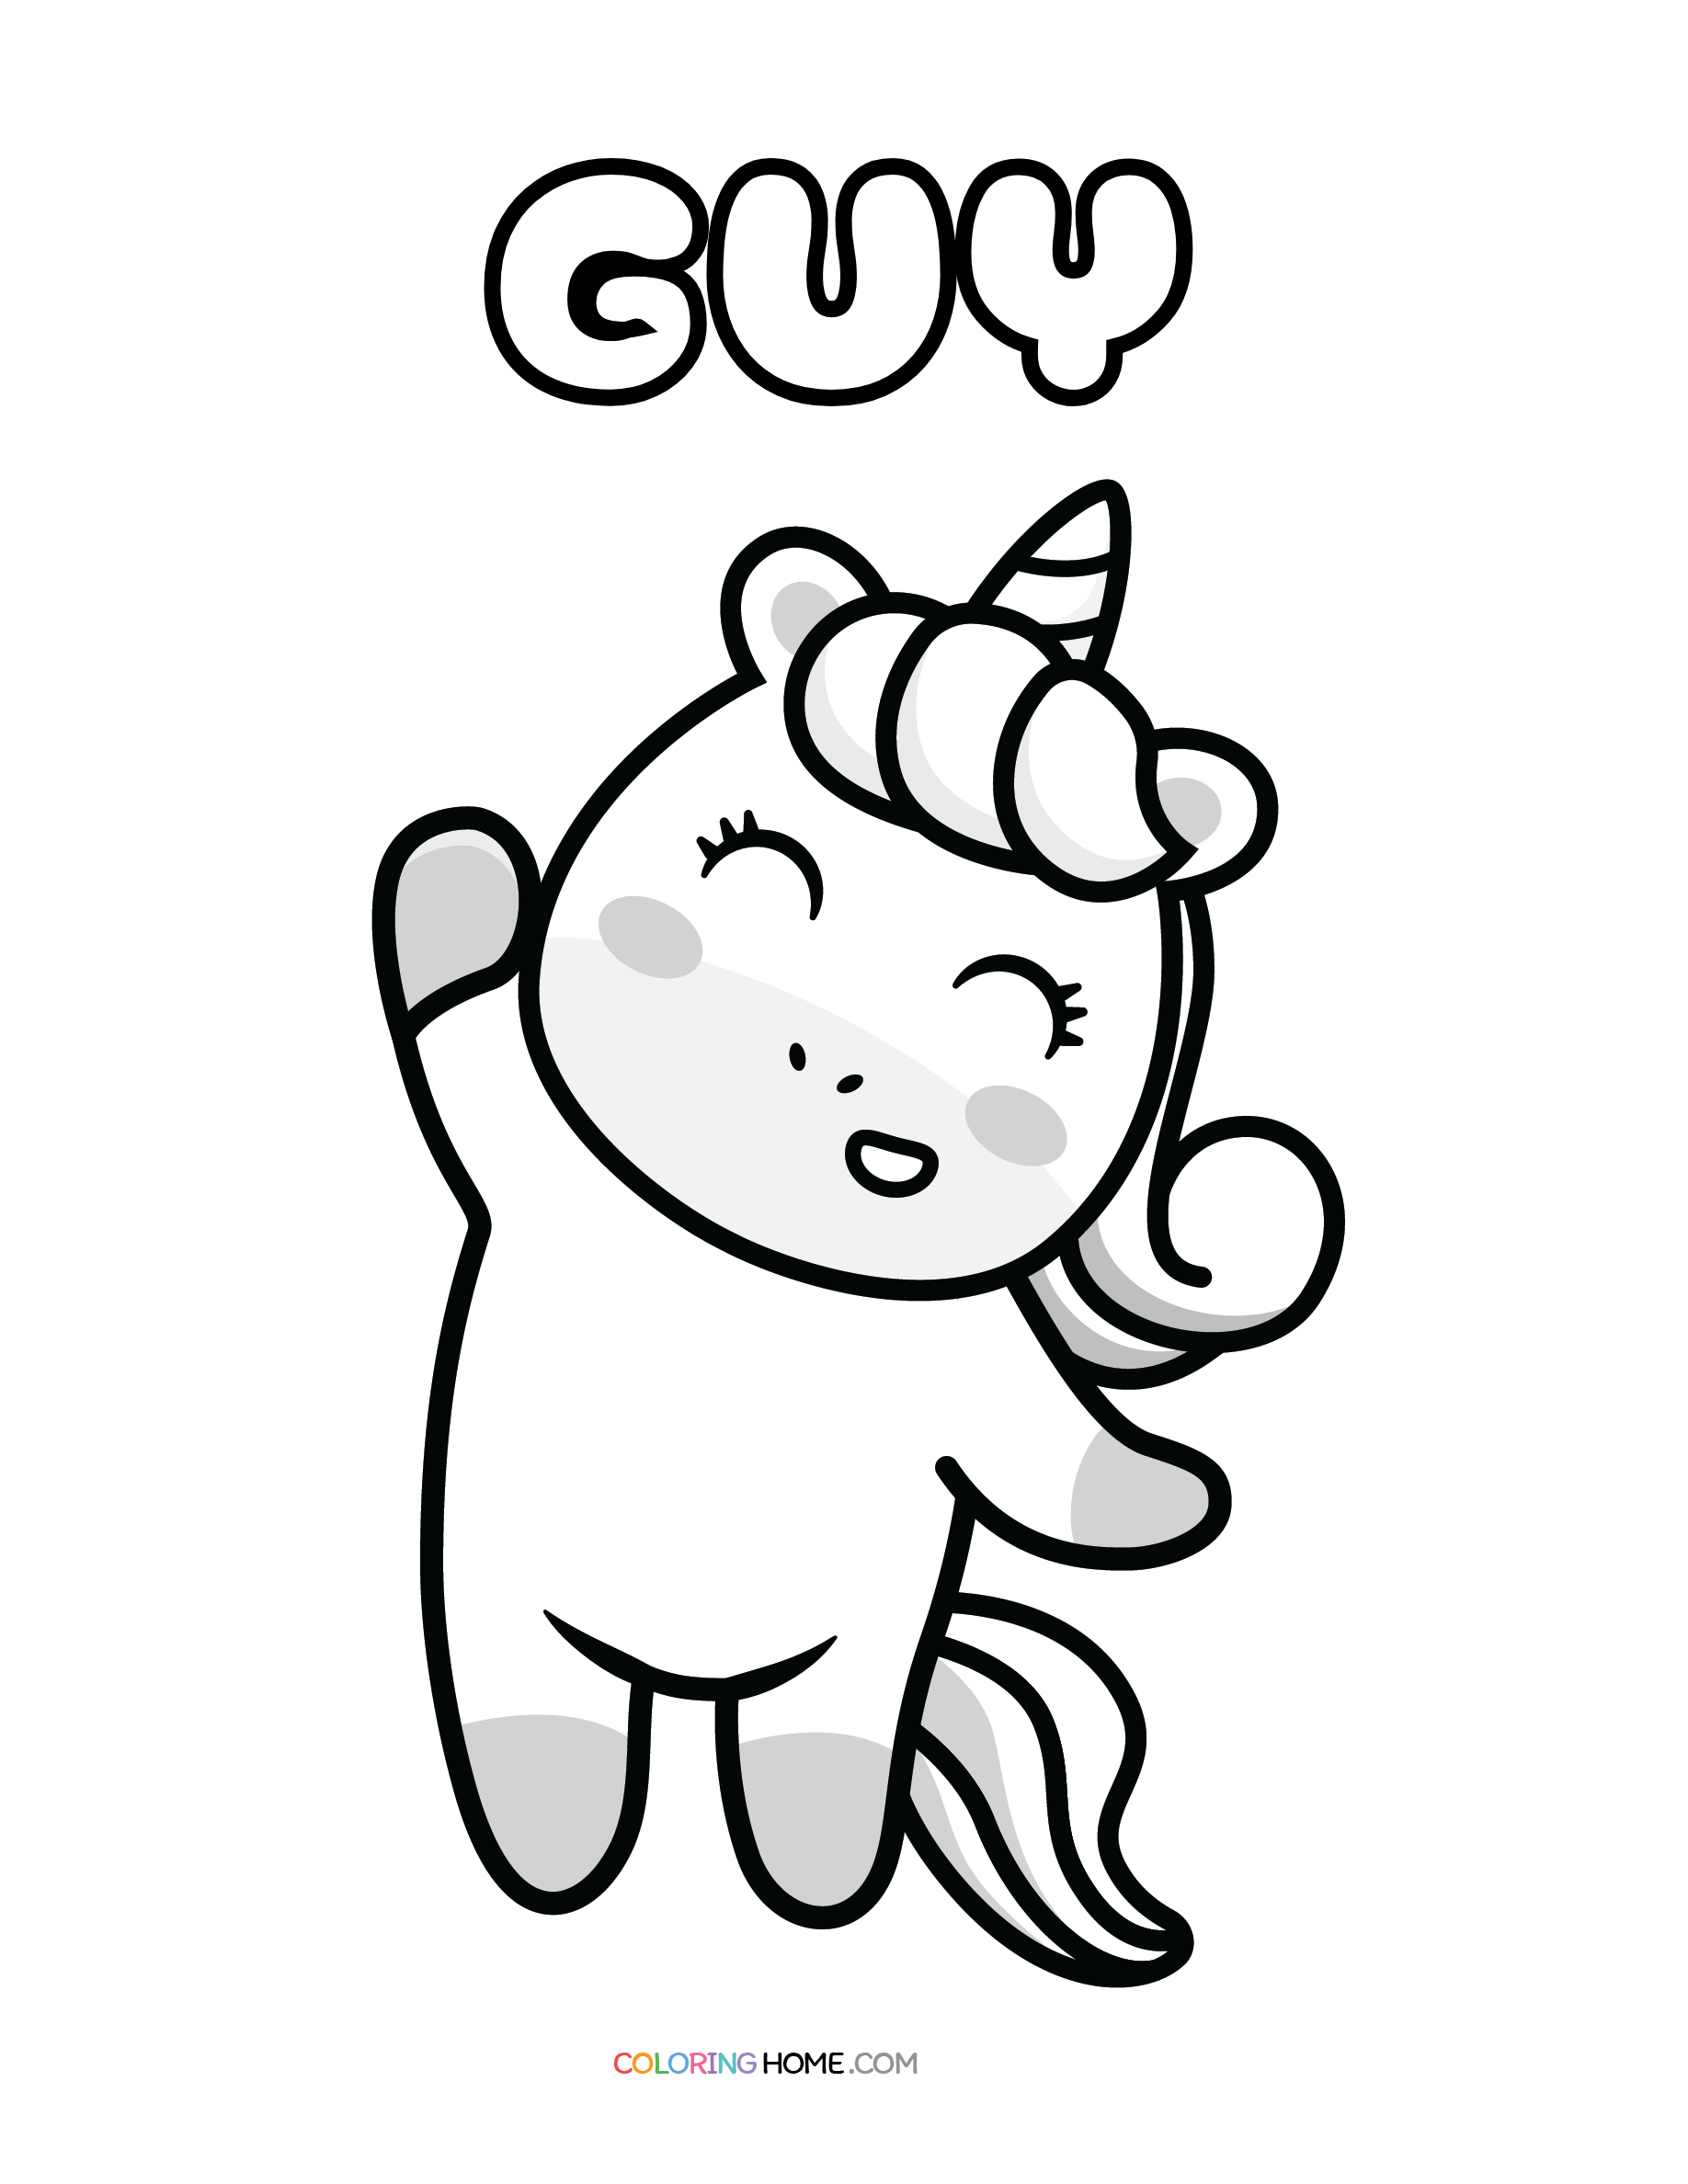 Guy unicorn coloring page